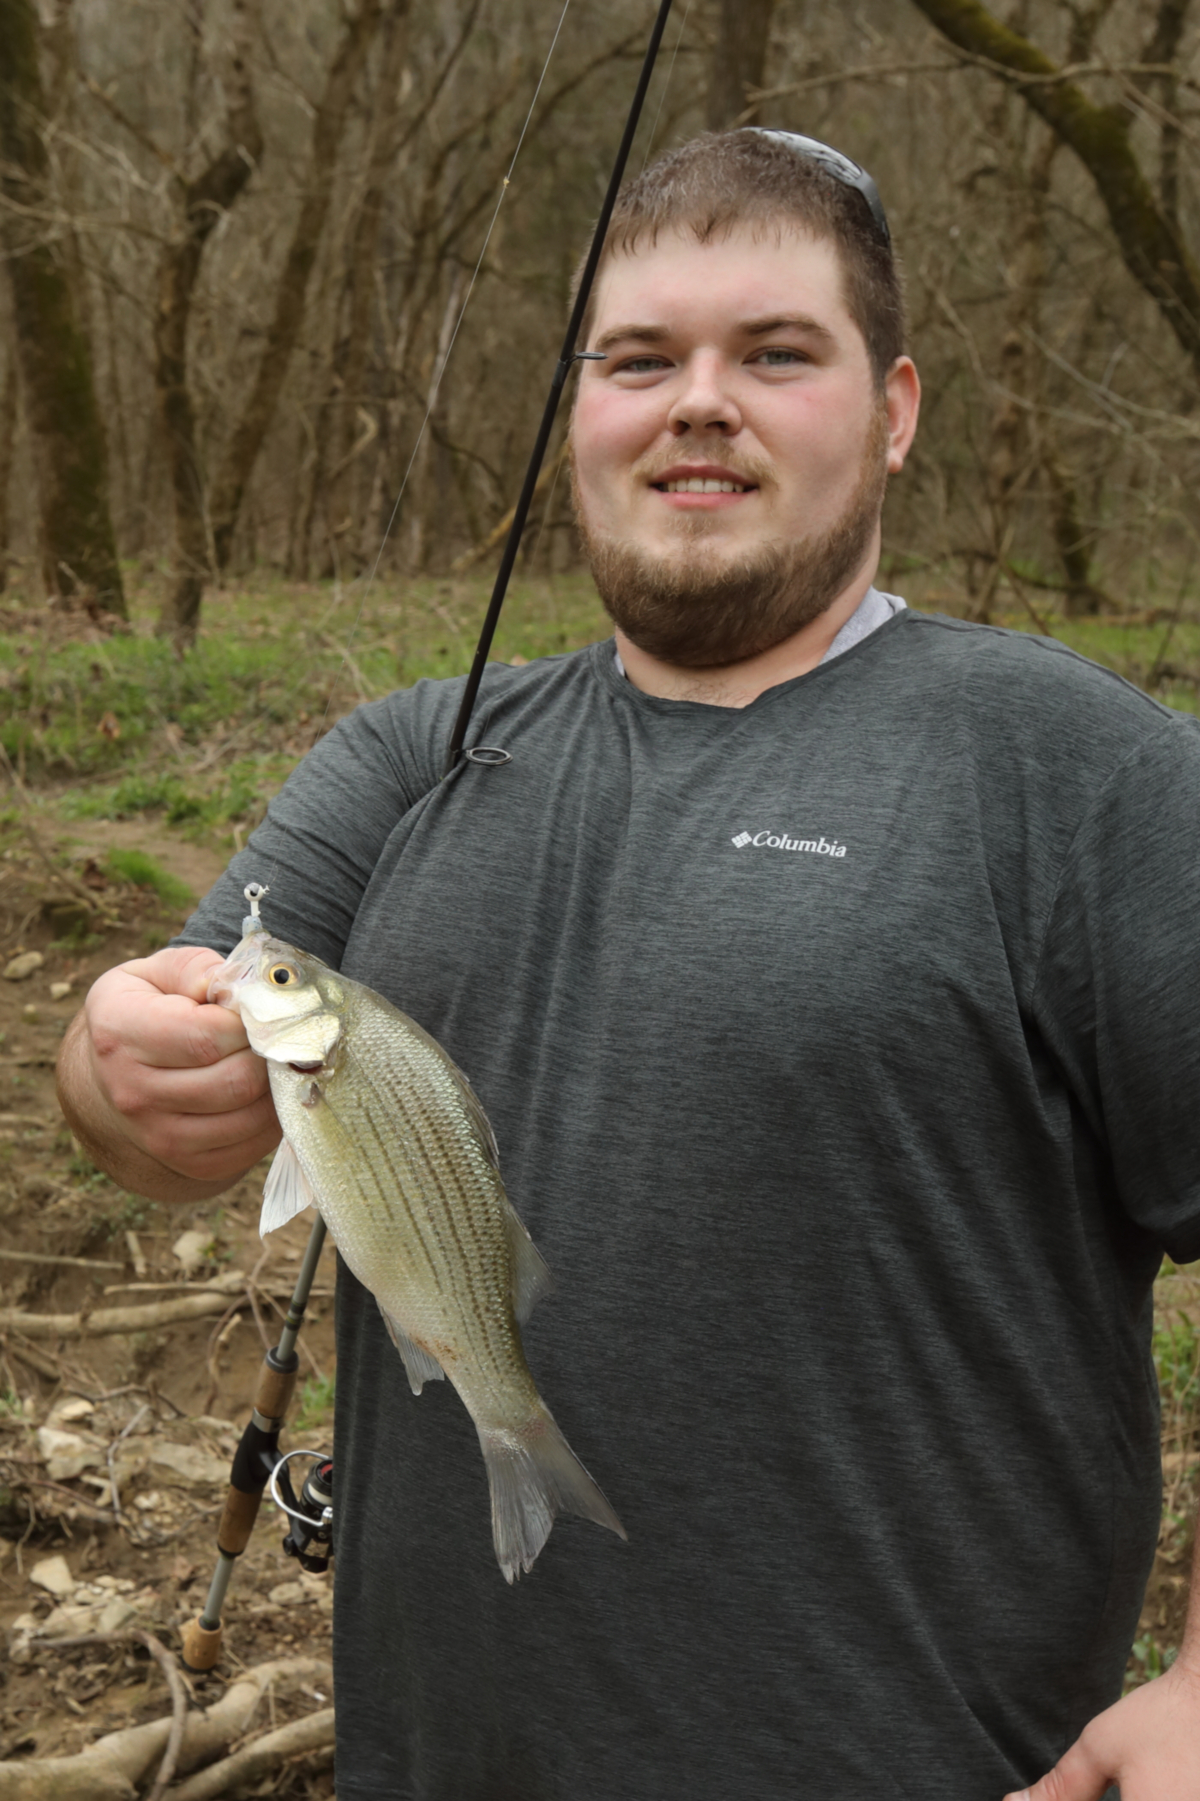 Chace White holding up a white bass and fishing rod